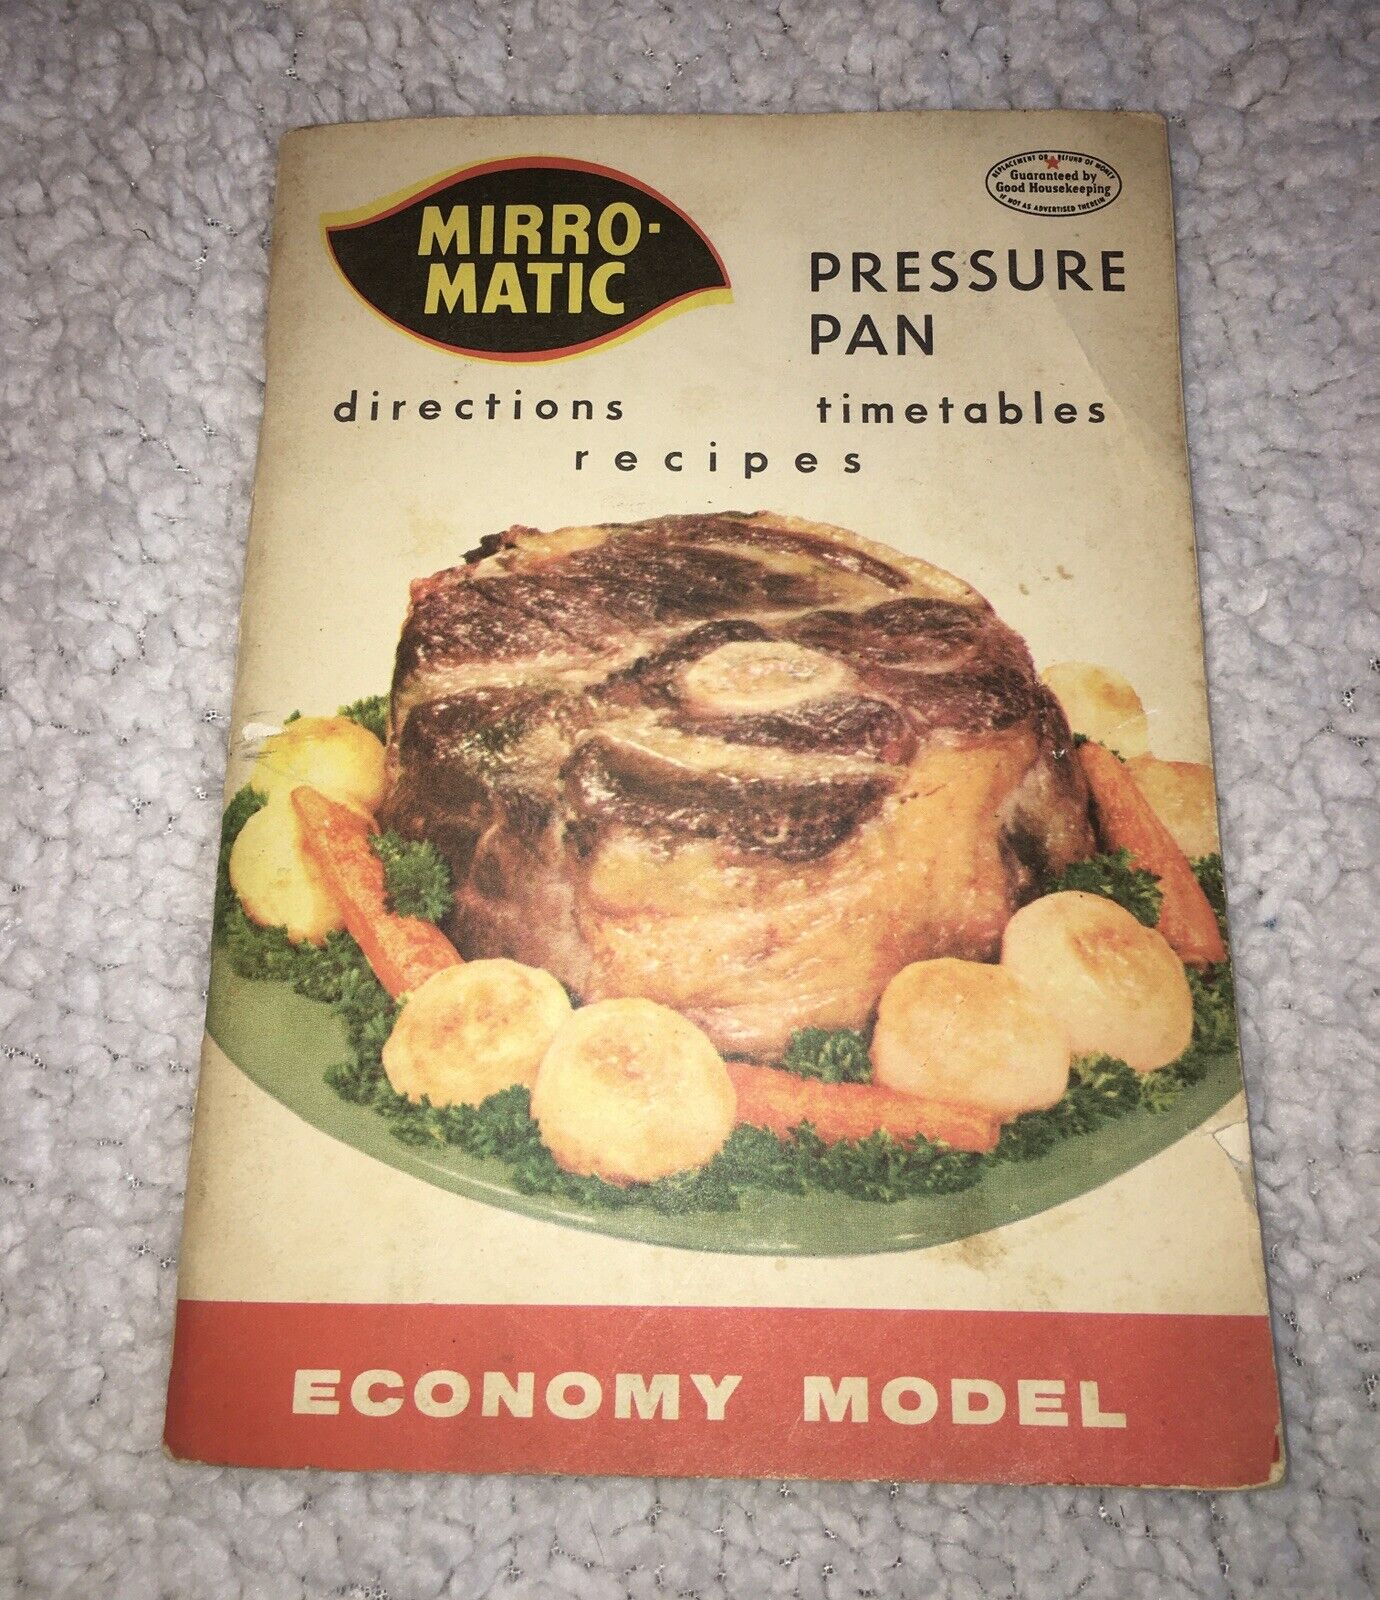 Vintage Cooking 1961 MIRRO-MATIC PRESSURE PAN TIMETABLES & RECIPES BOOKLET